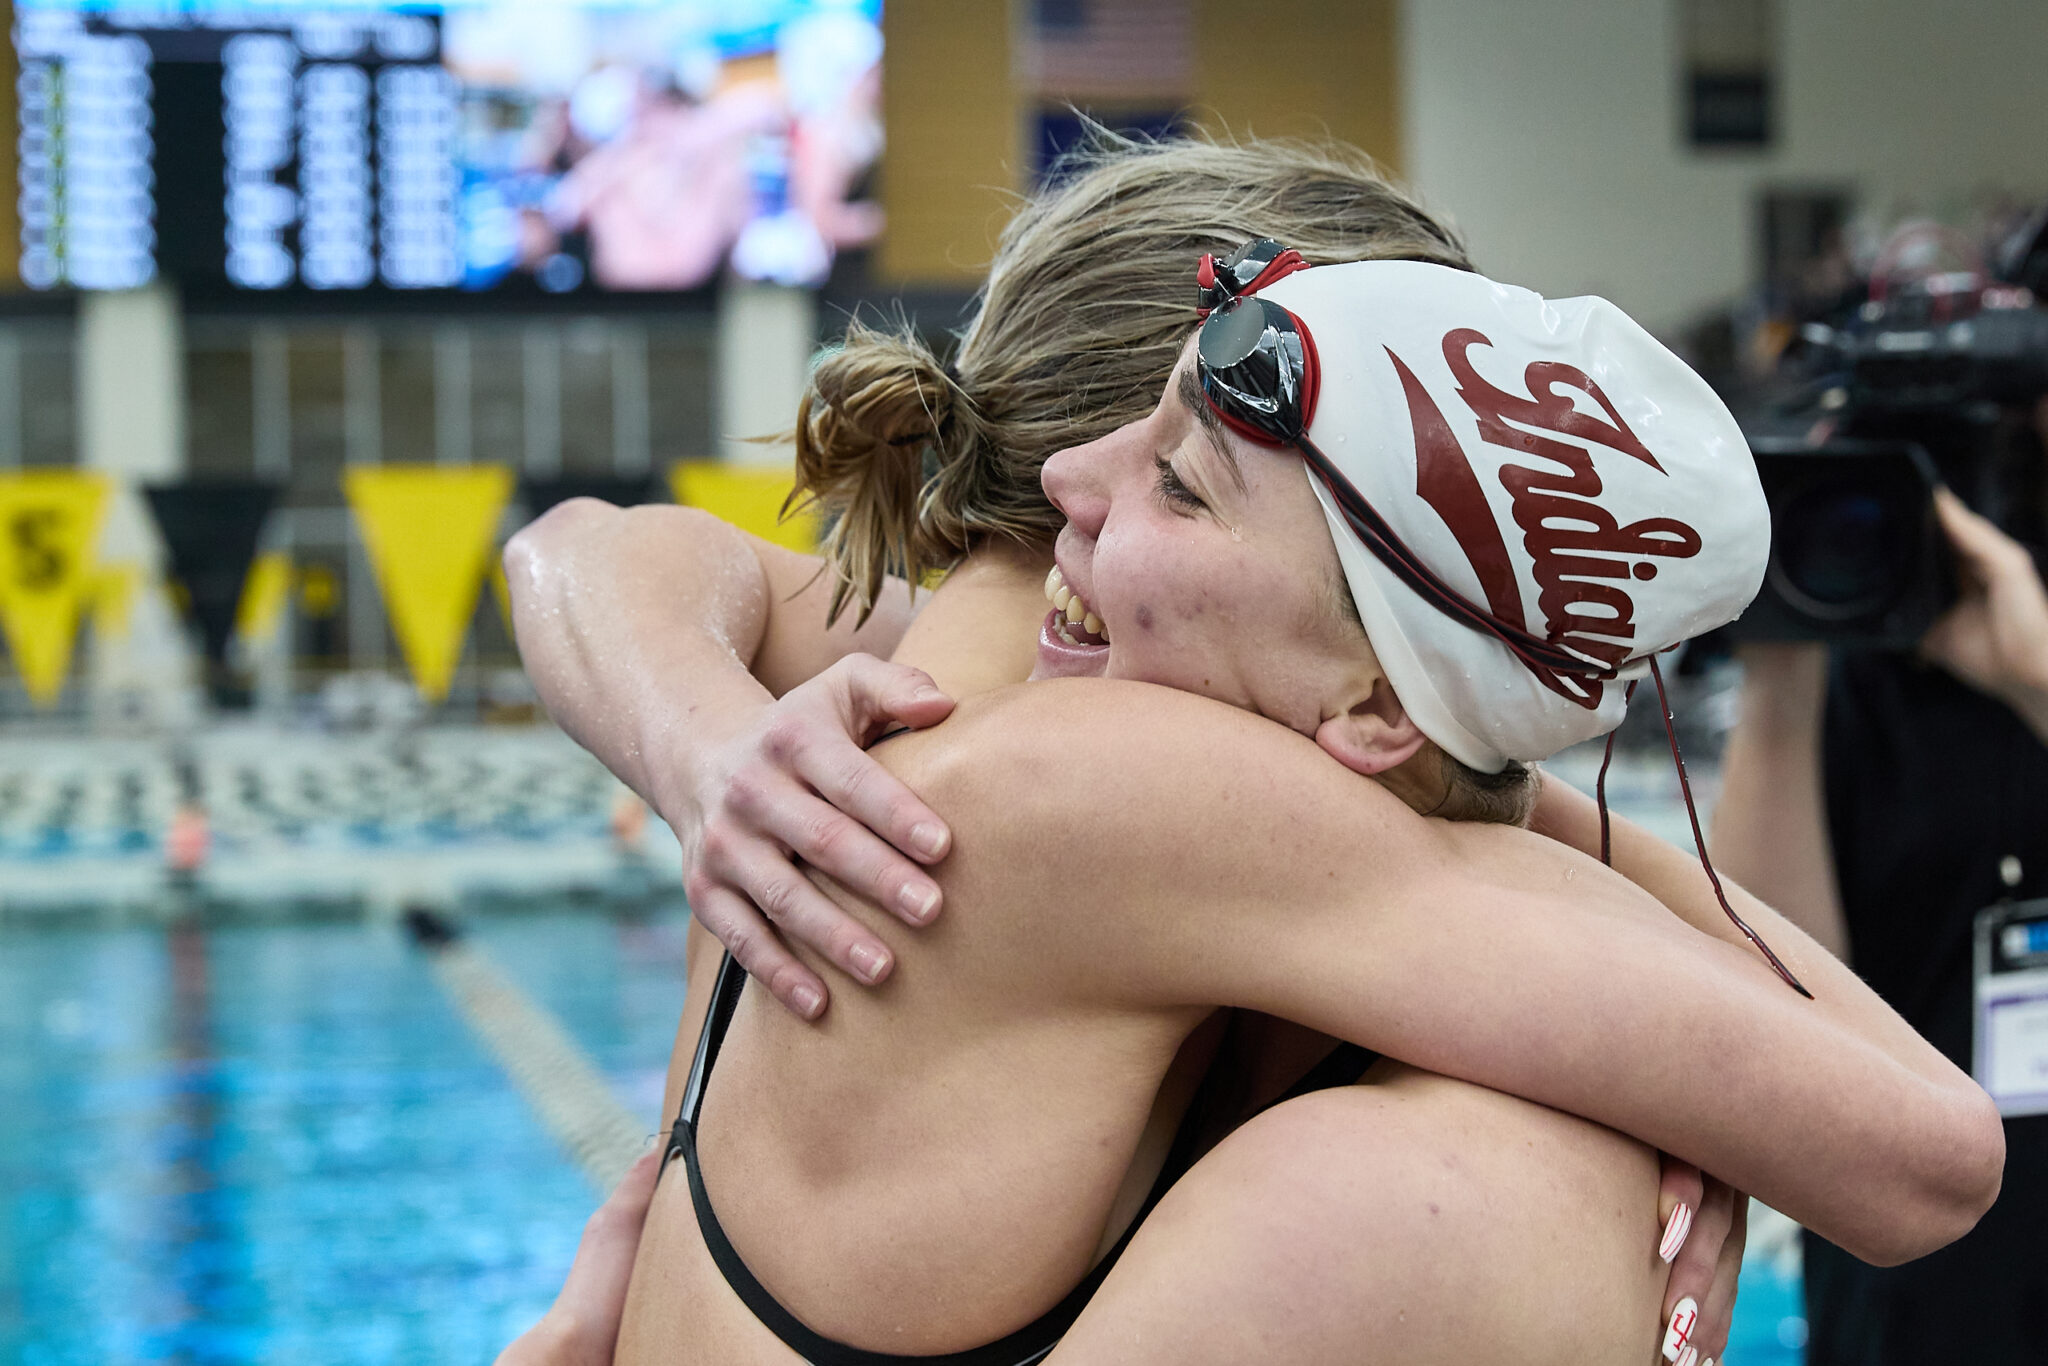 Indiana Women Beat Ohio State By .5 Points to Snap Four-Year Big Ten Title Streak